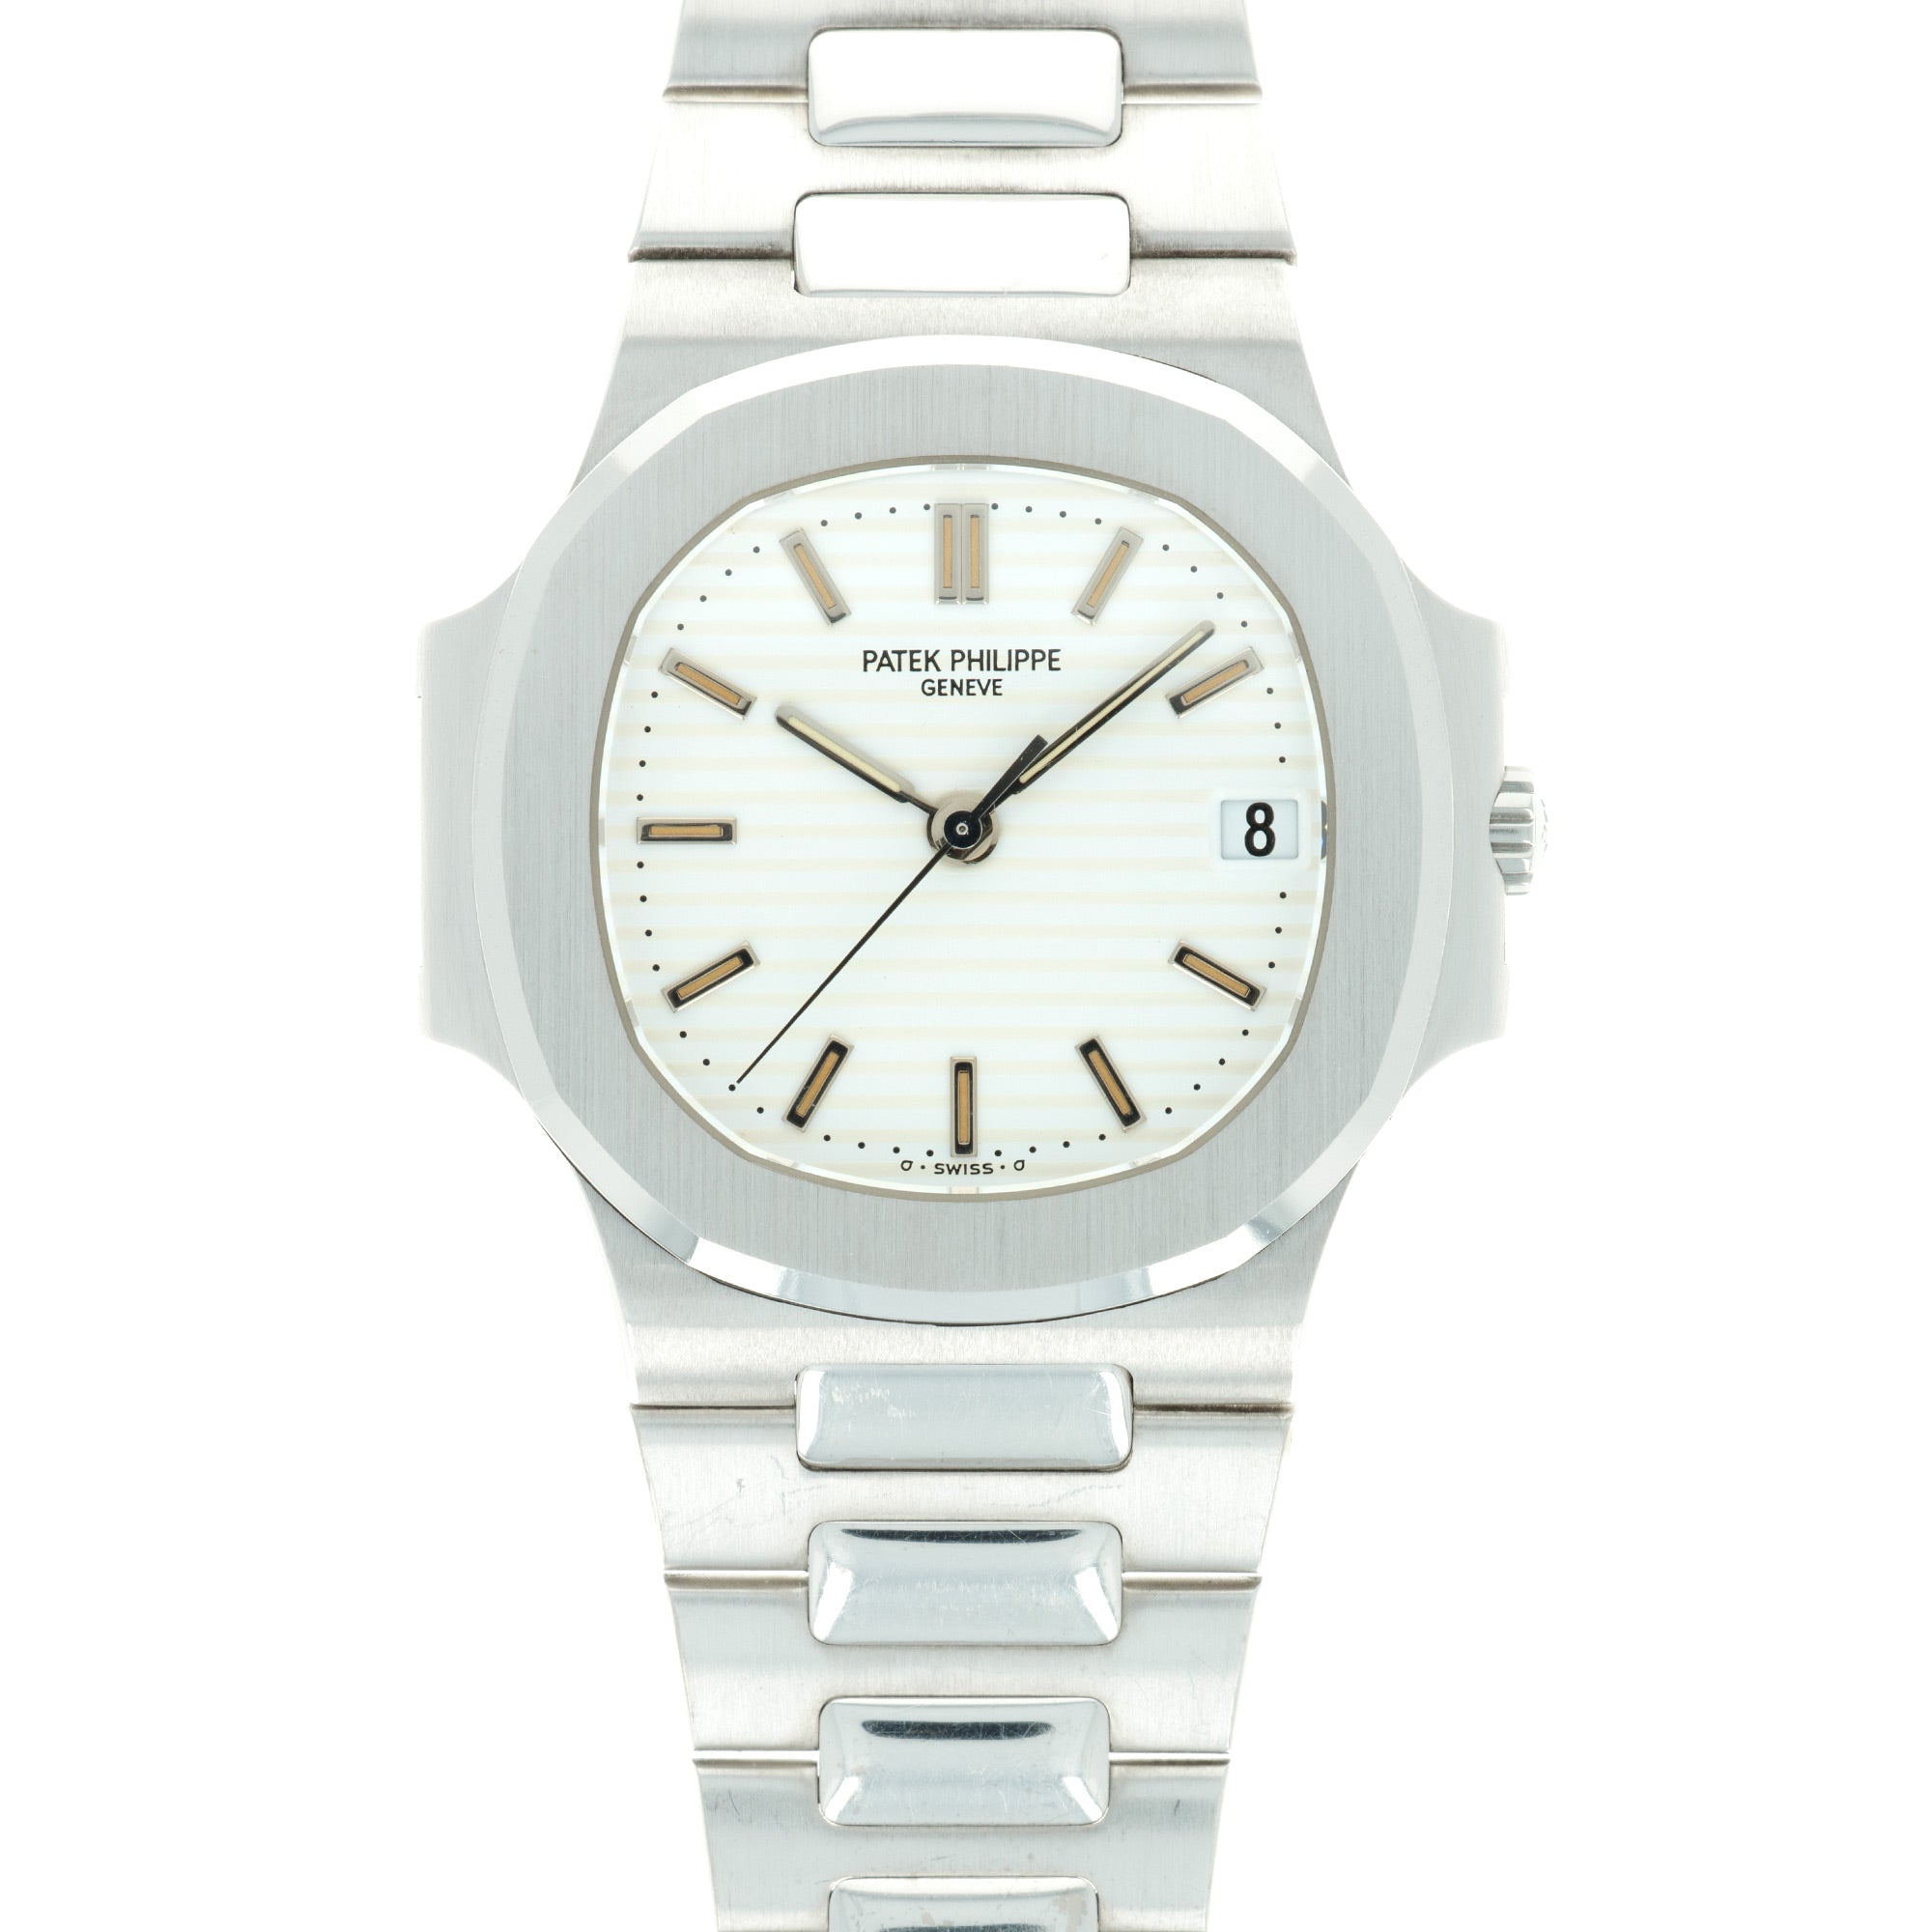 Patek Philippe - Patek Philippe White Gold Nautilus Ref. 3800 in Top Condition - The Keystone Watches